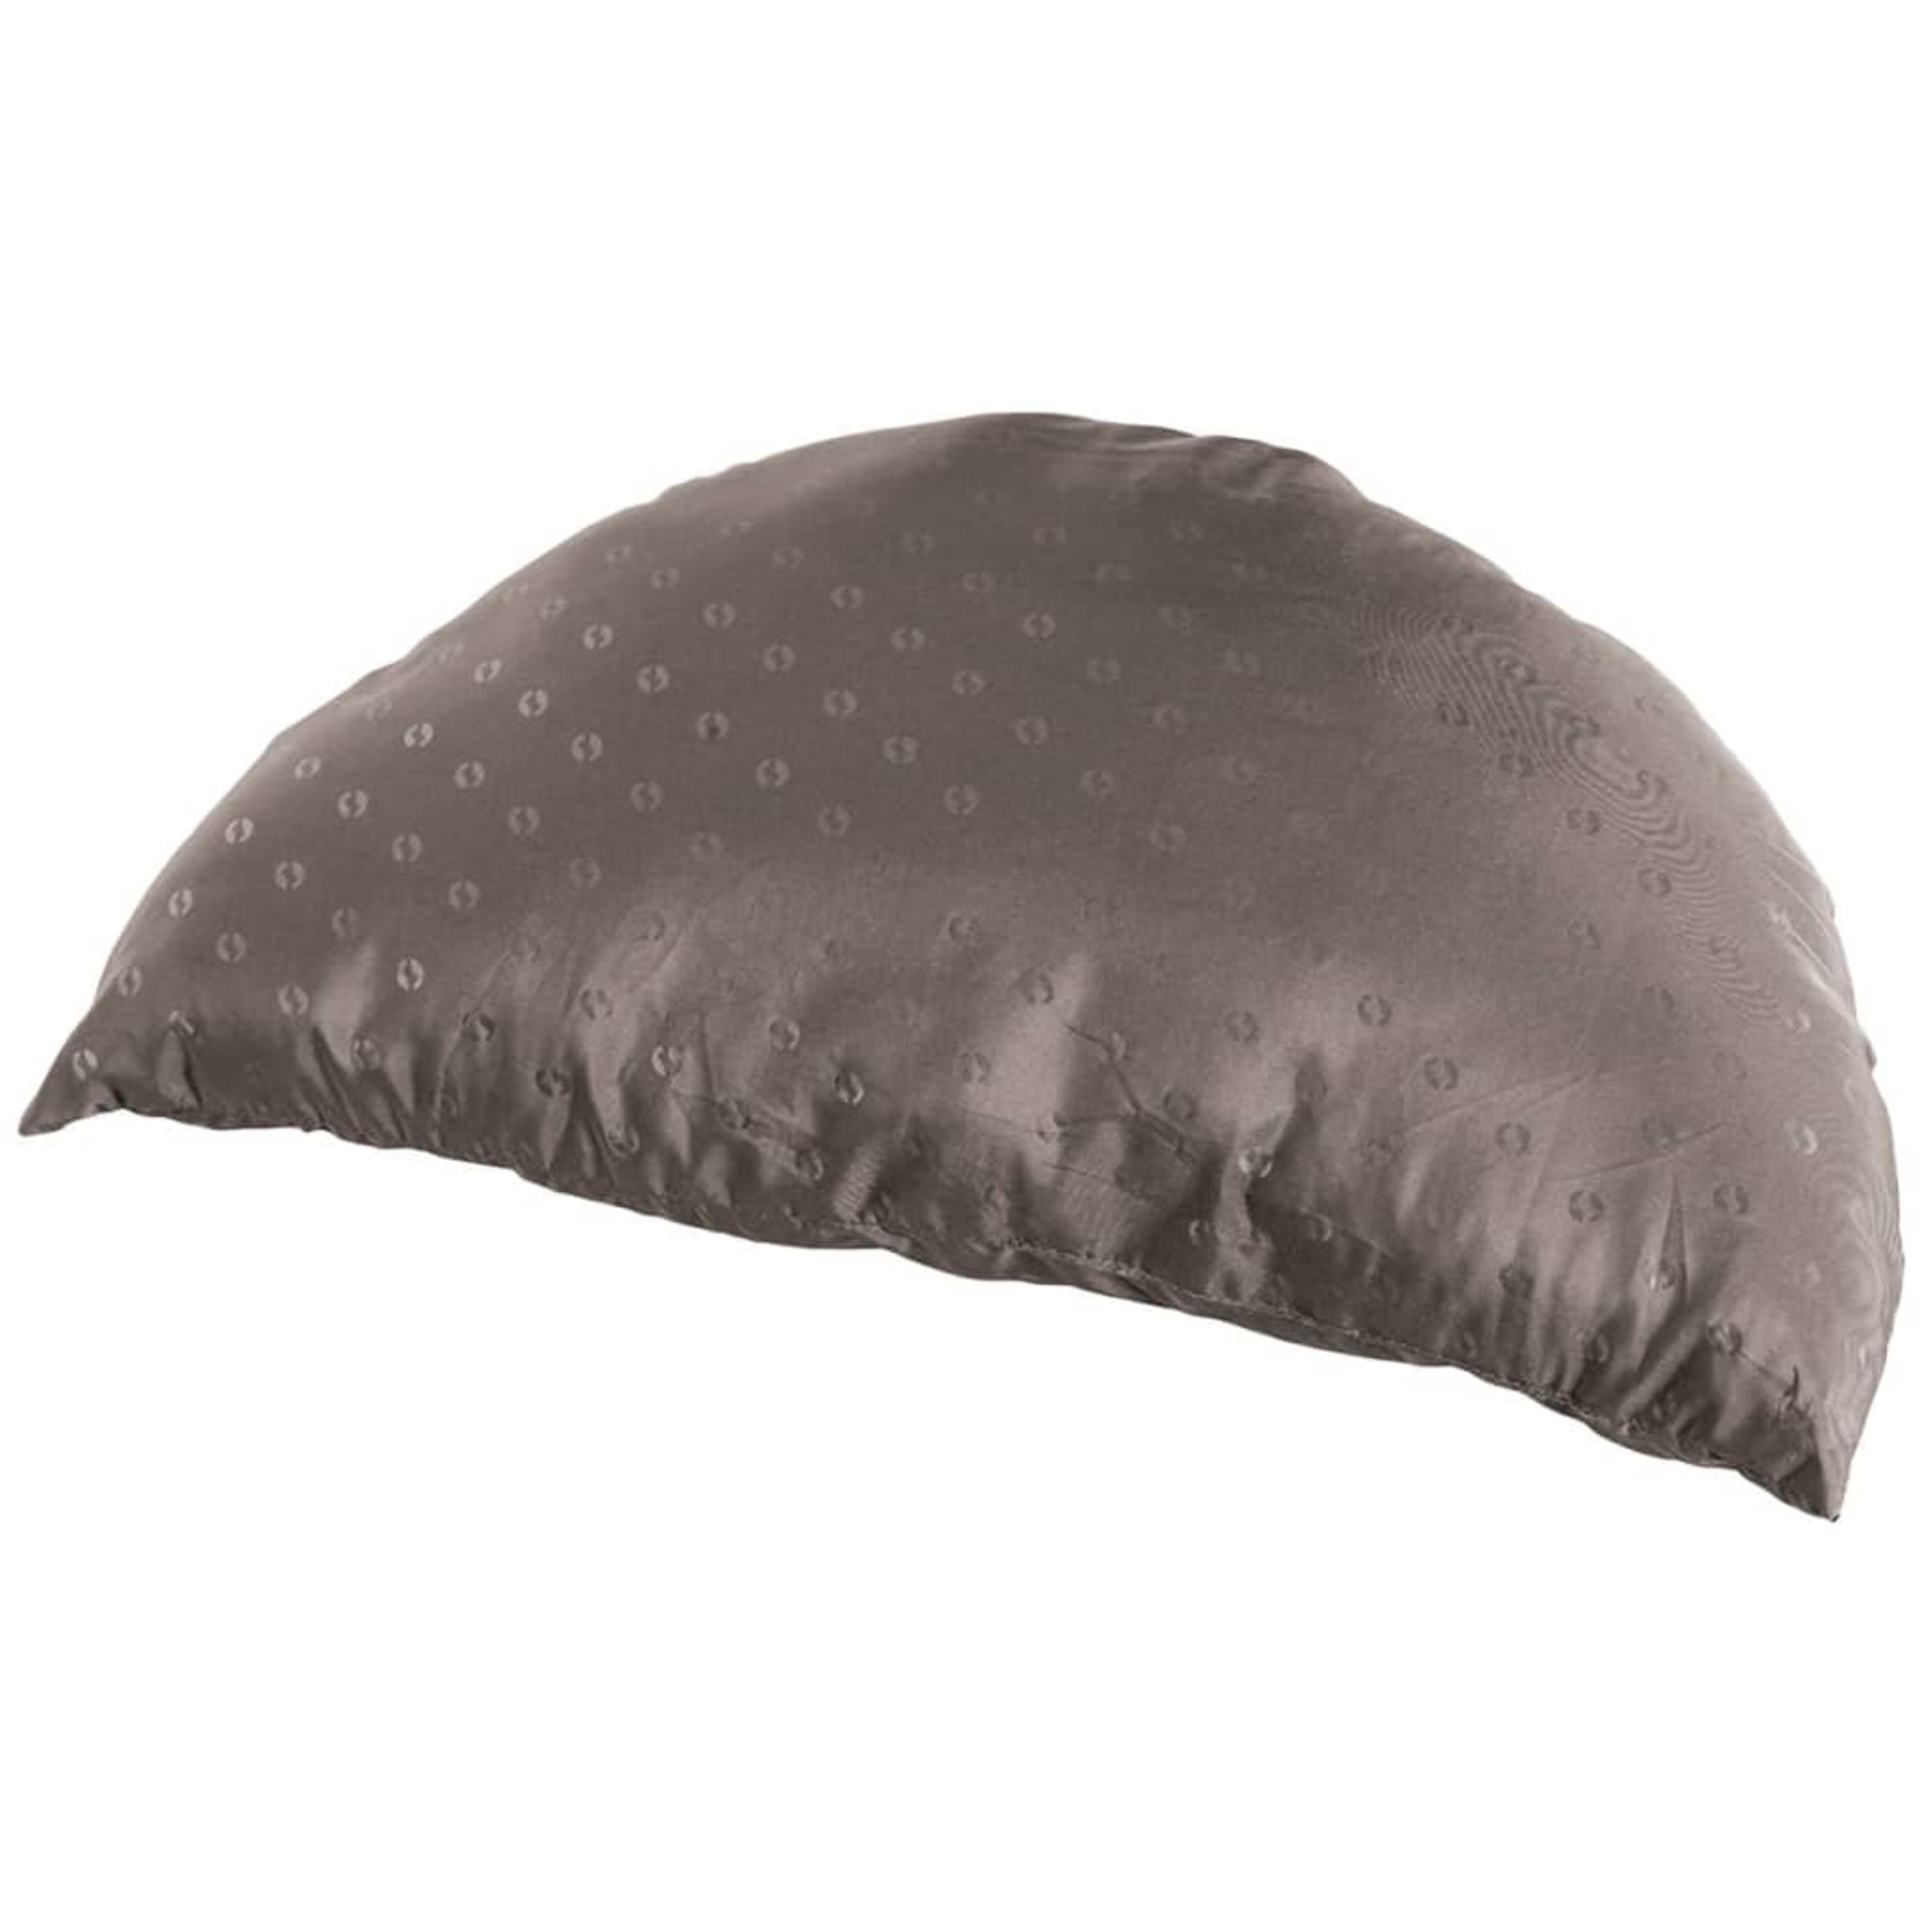 Outwell Almohada Soft Moon 55x30x10 Cm Gris 230033 - Gris - Almohada  MKP